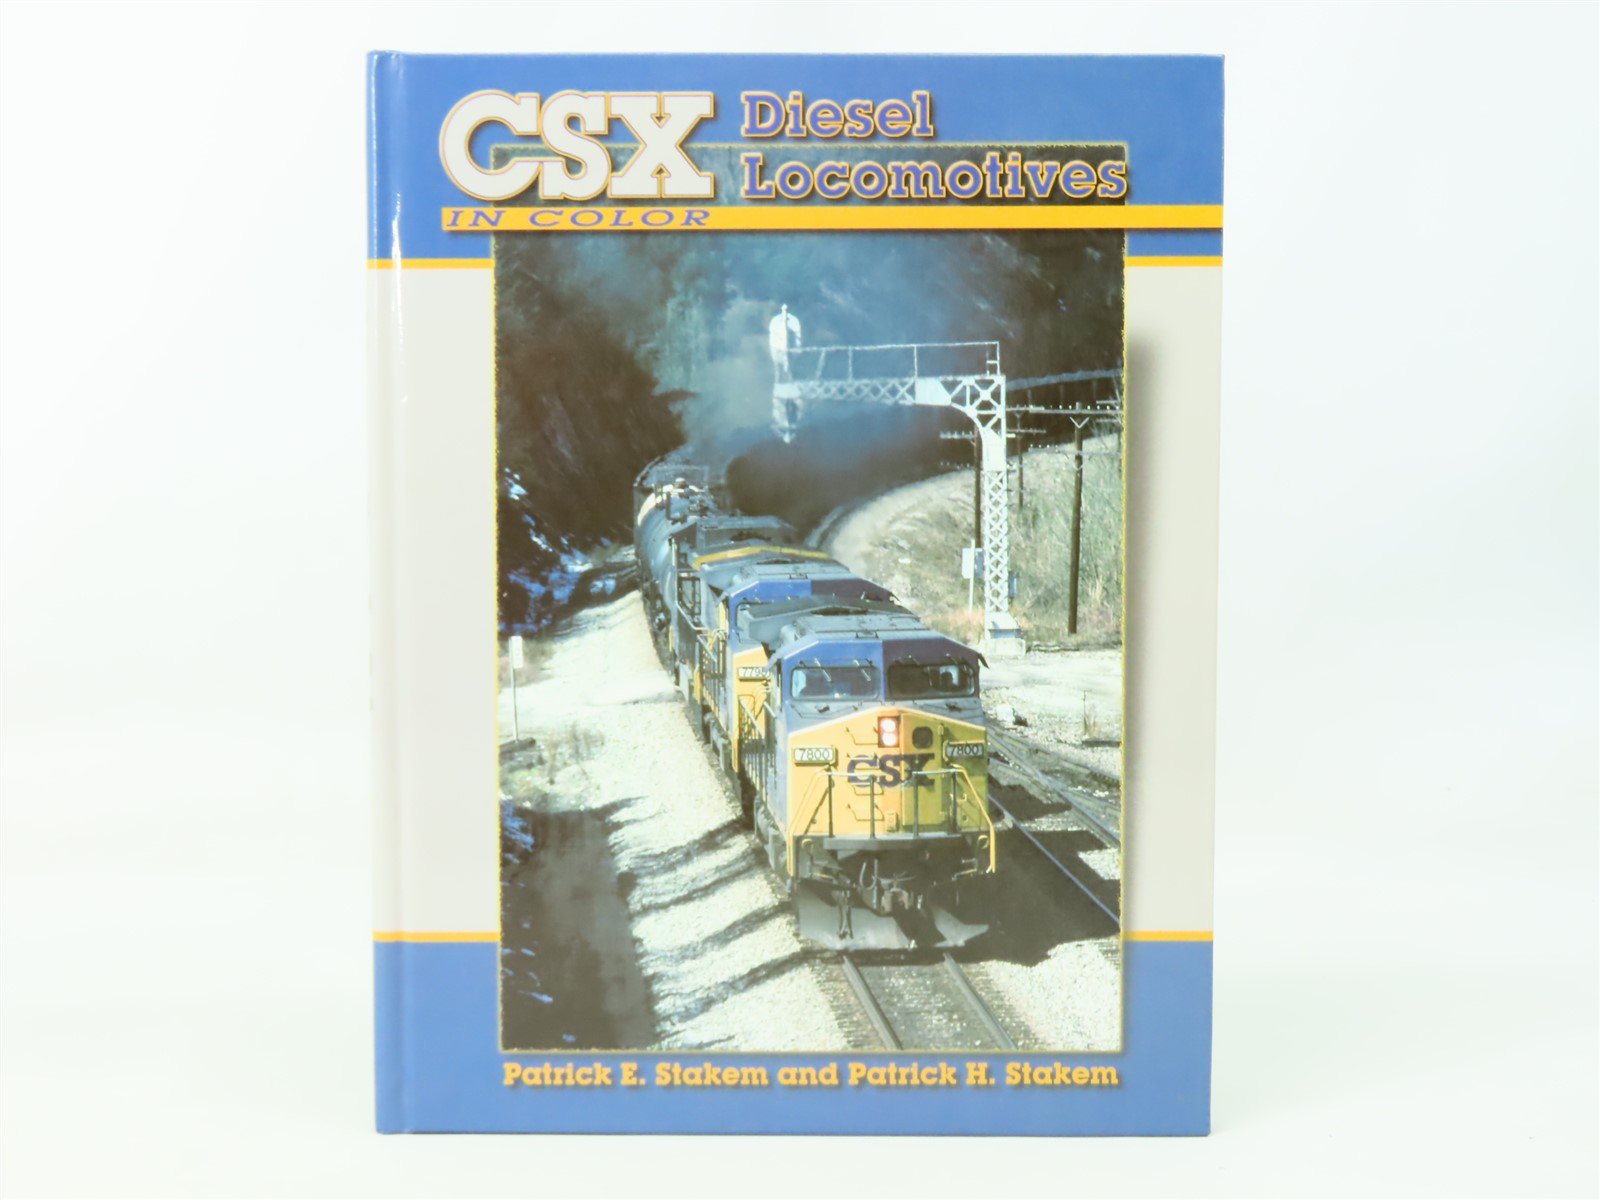 CSX Diesel Locomotives In Color by P.E. Stakem & P.H. Stakem ©1999 HC Book